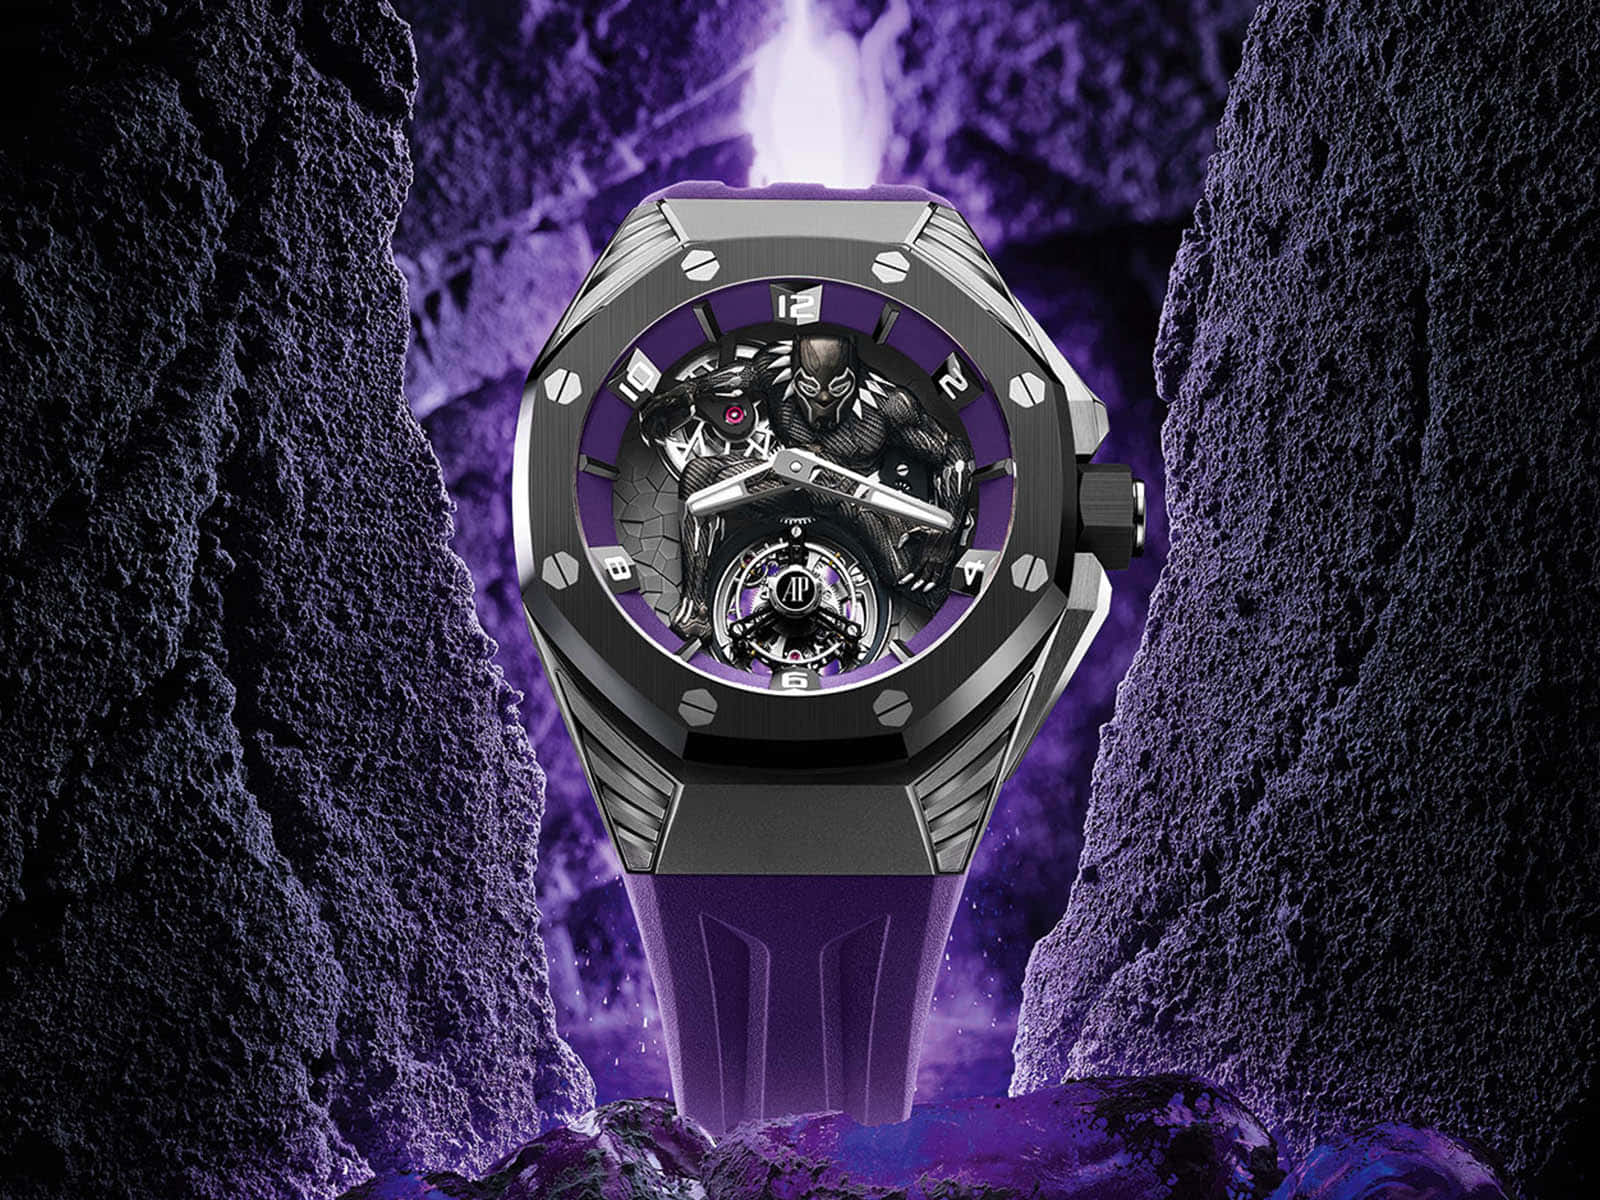 Making pockets proud with the Purple Watch Wallpaper